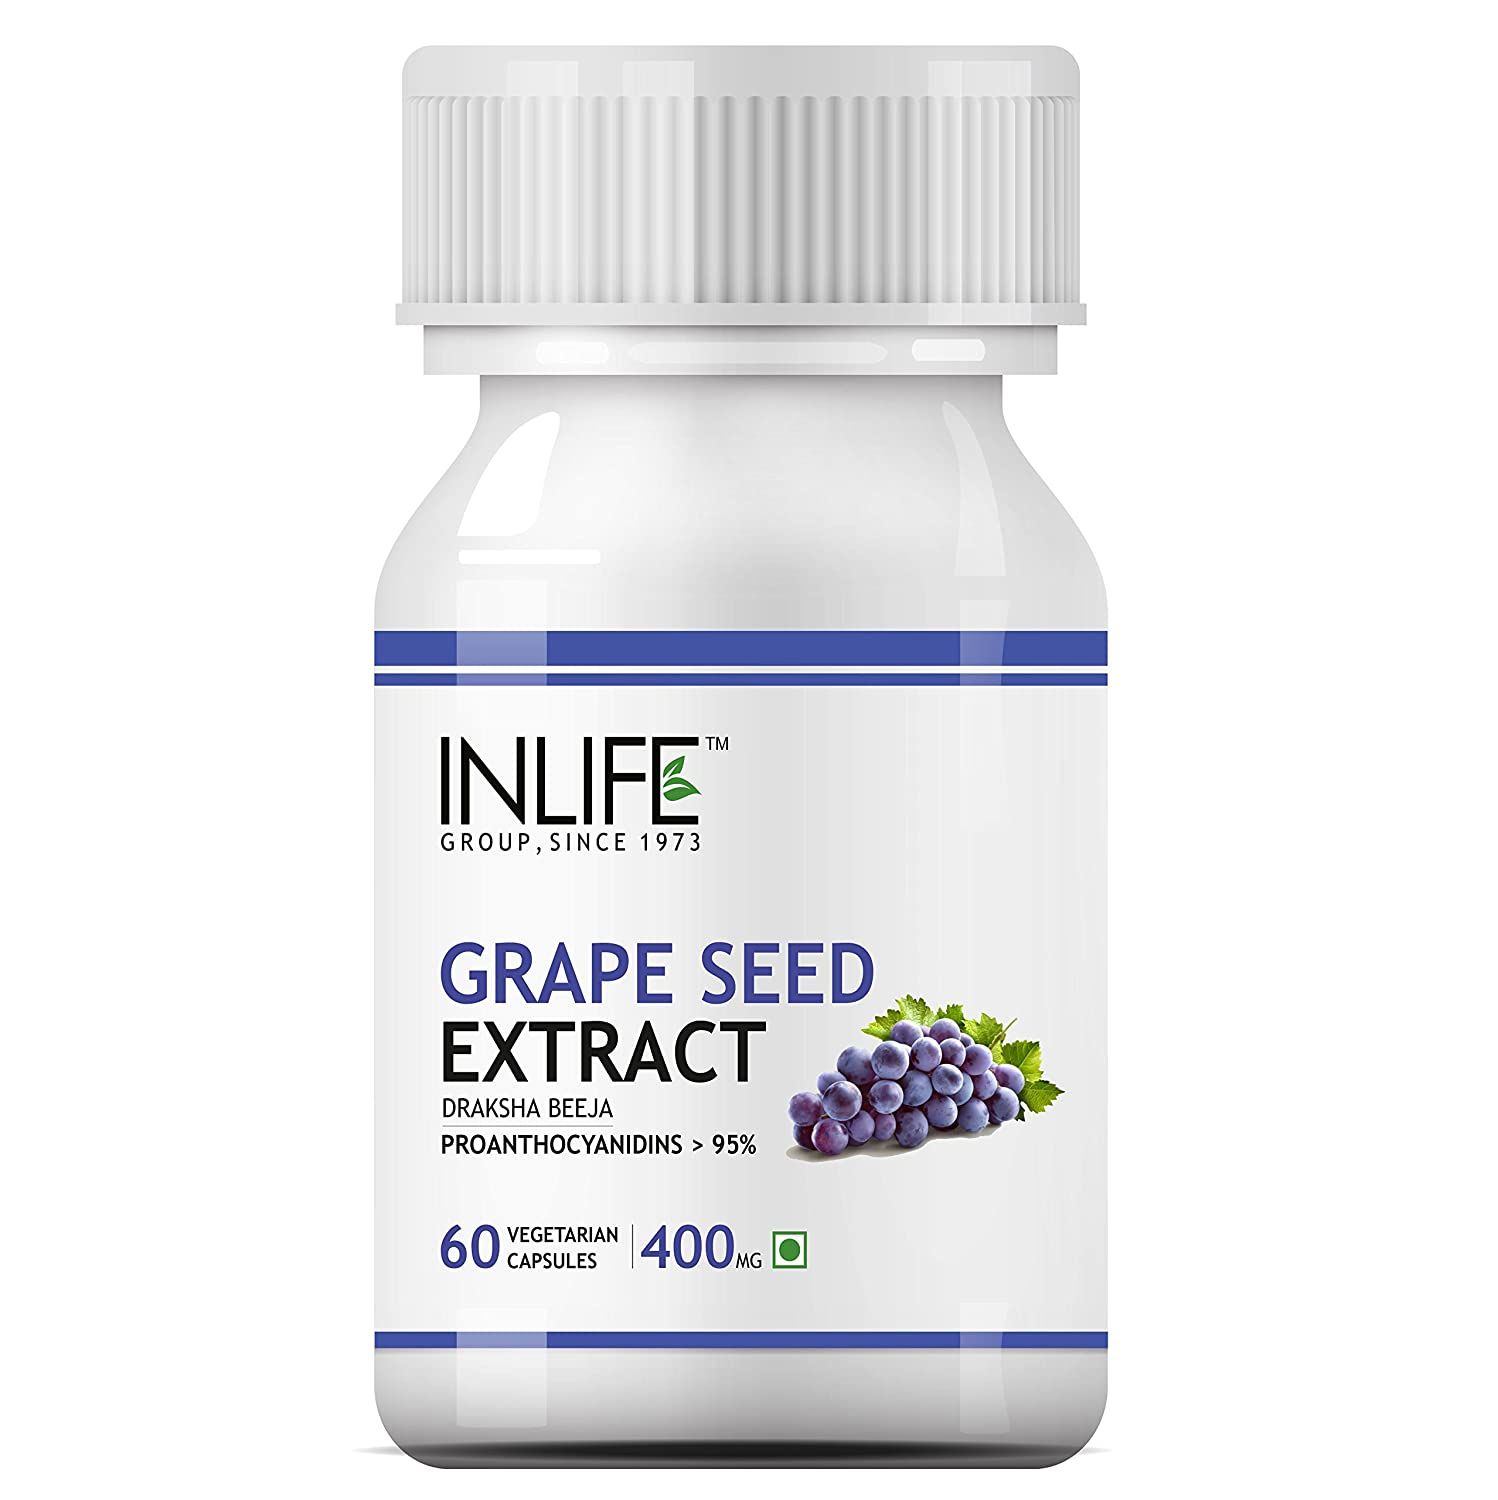 INLIFE Grape Seed Extract Image